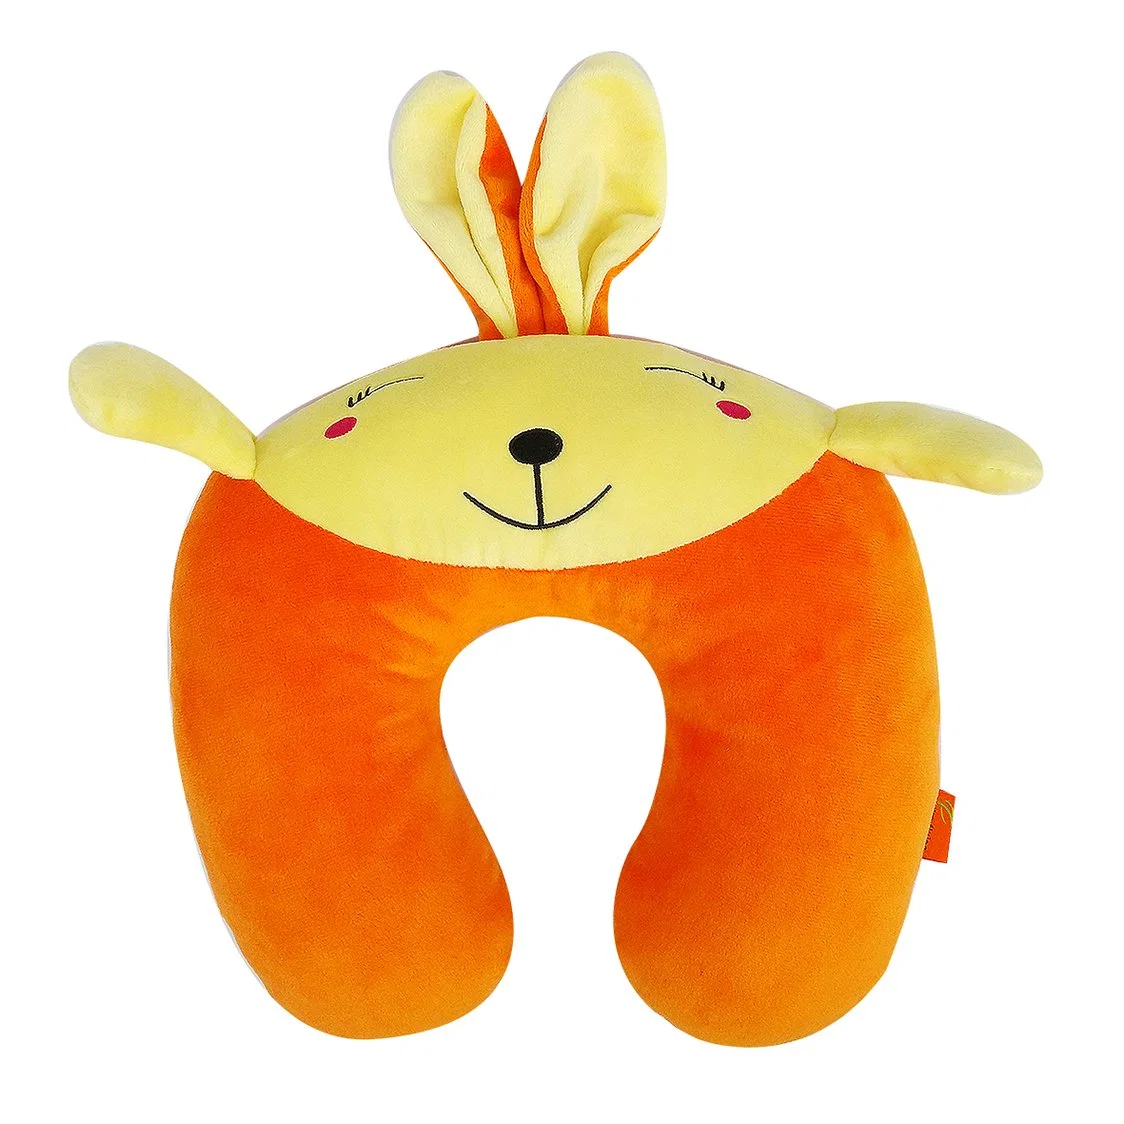 Wholesale Travel Neck Pillow for Kids Neck Support U-Shaped Animal Pillows for Airplane